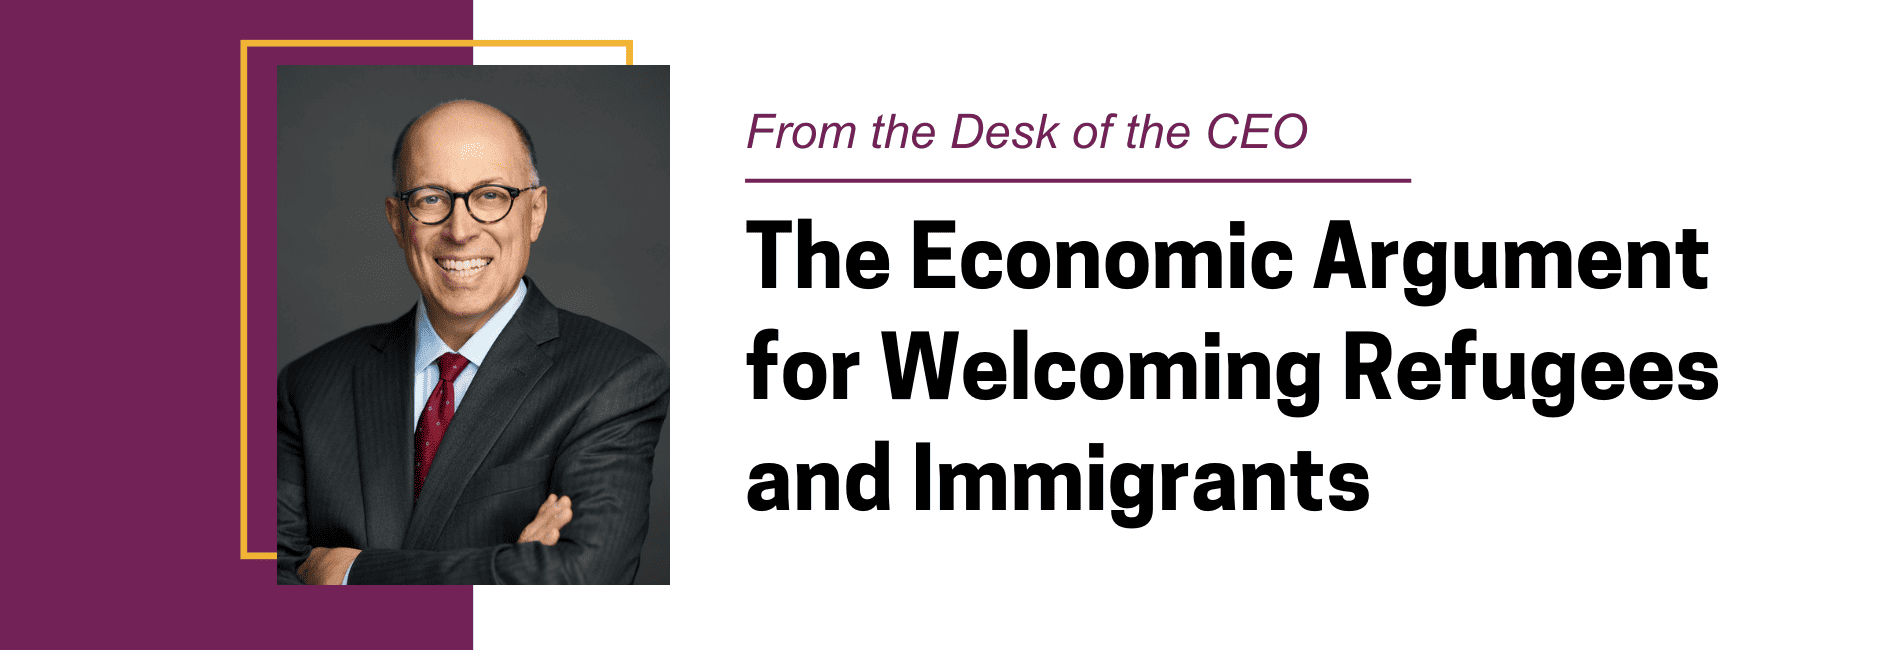 From the Desk of the CEO: The Economic Argument for Welcoming Refugees and Immigrants